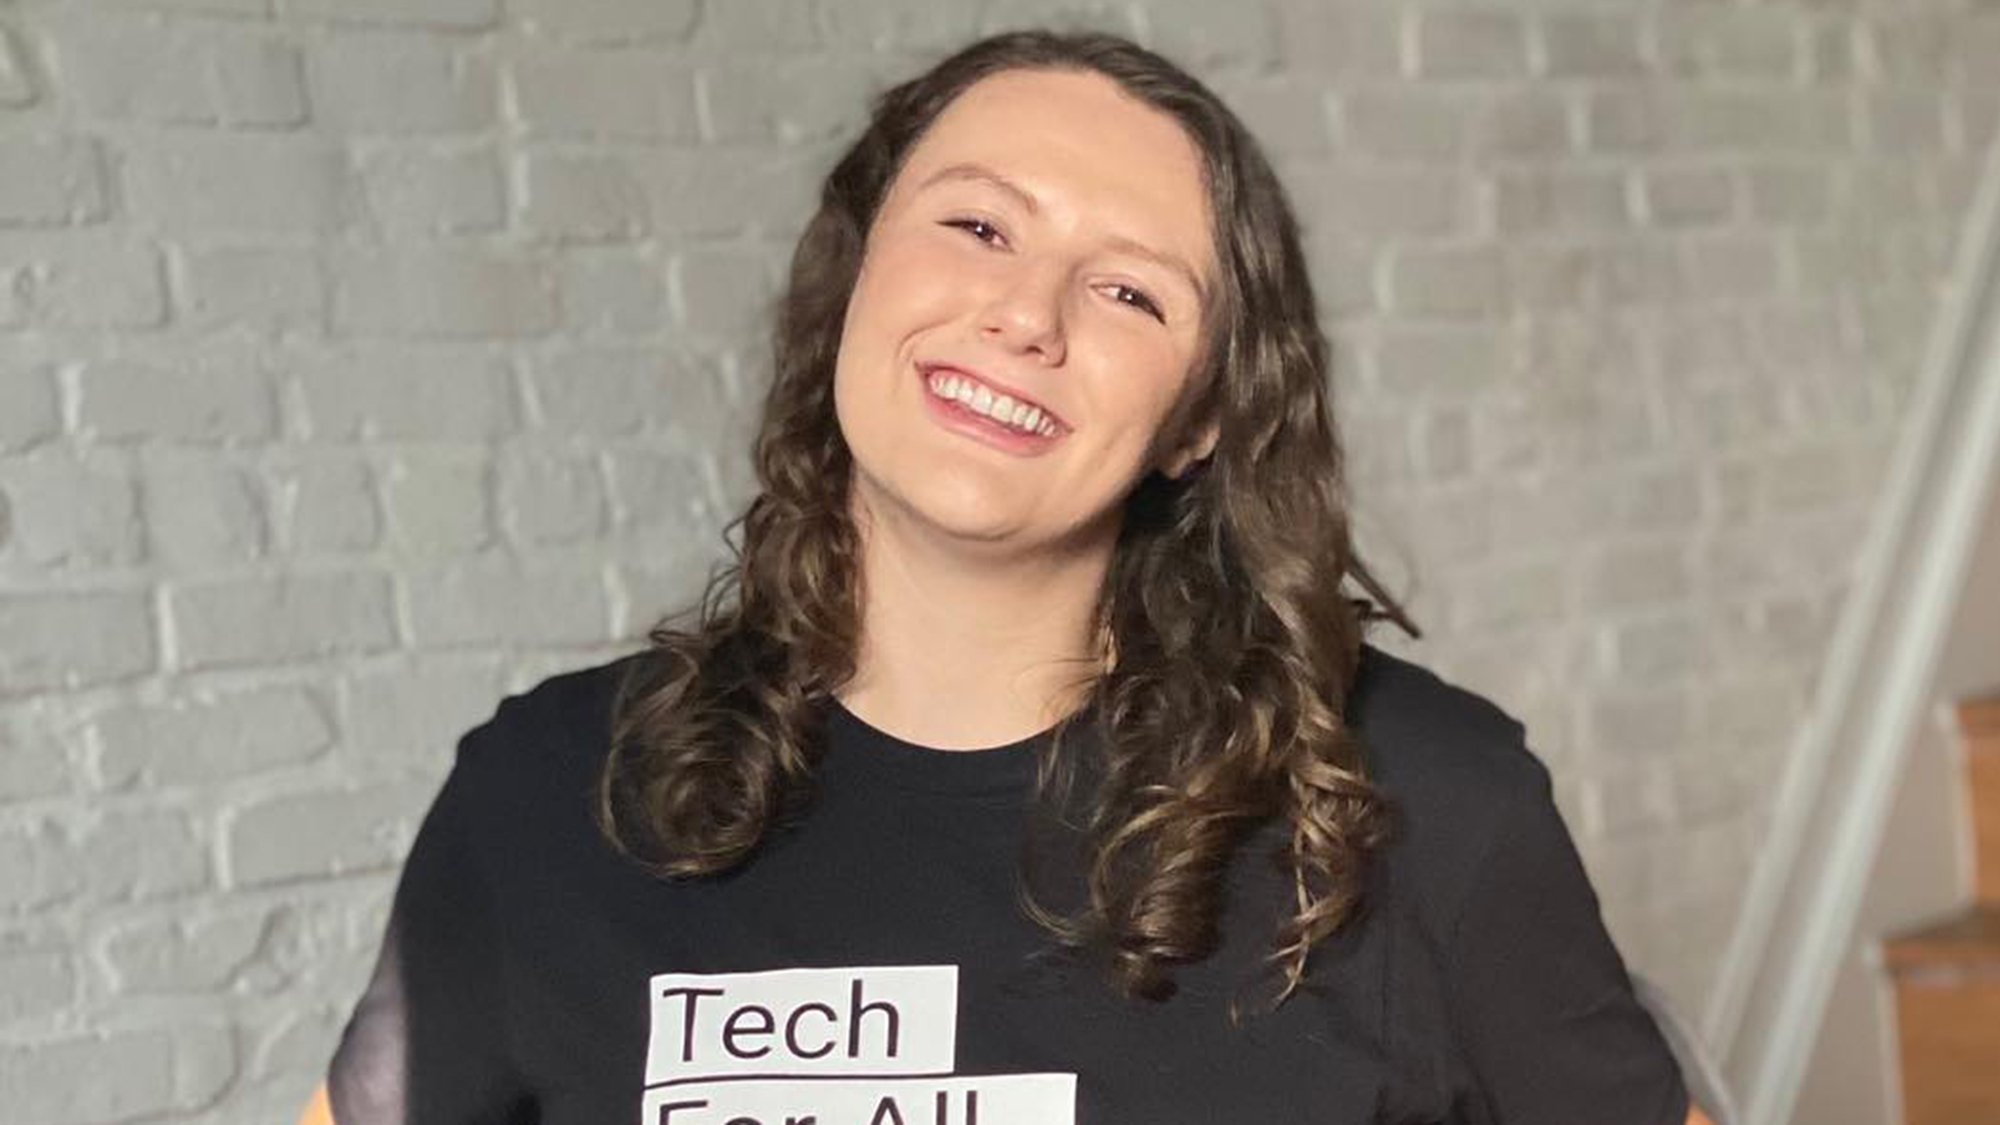 Young ’30 Under 30′ Tech CEO Pava LaPere, Found Dead Inside Baltimore Apartment